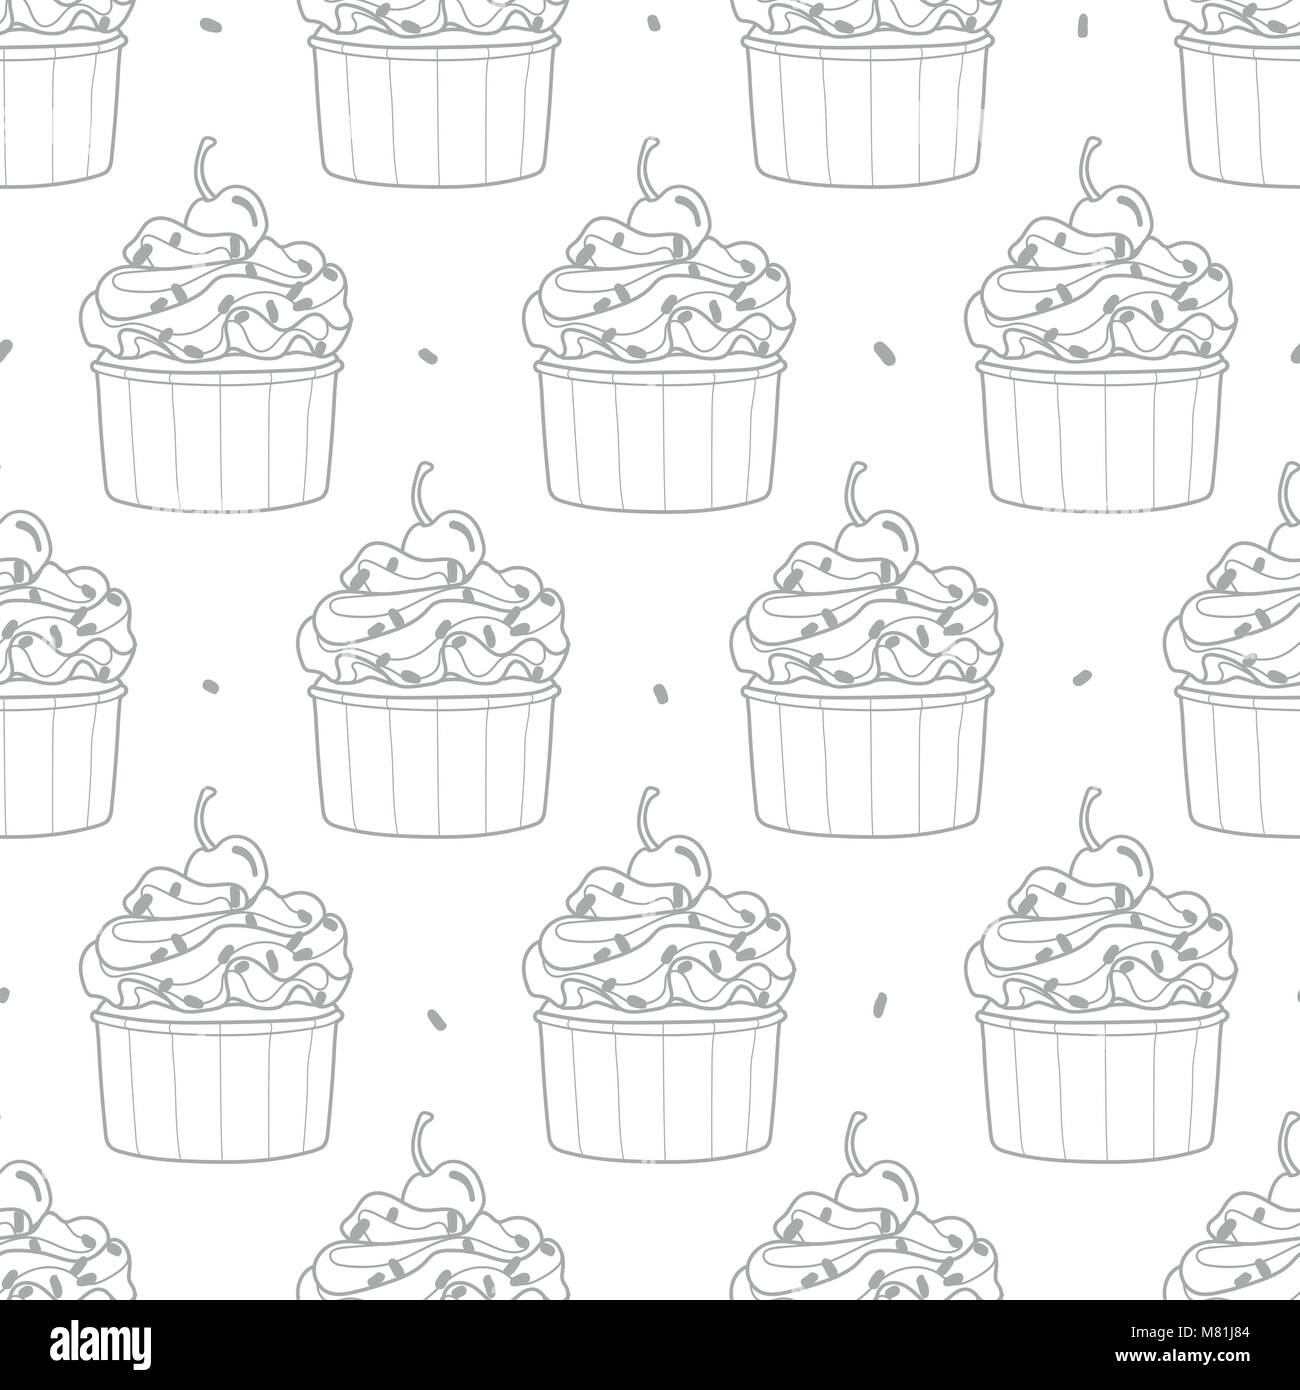 Cupcakes and dots random on white background. Cute hand drawn seamless pattern of dessert in light gray outline. Stock Vector